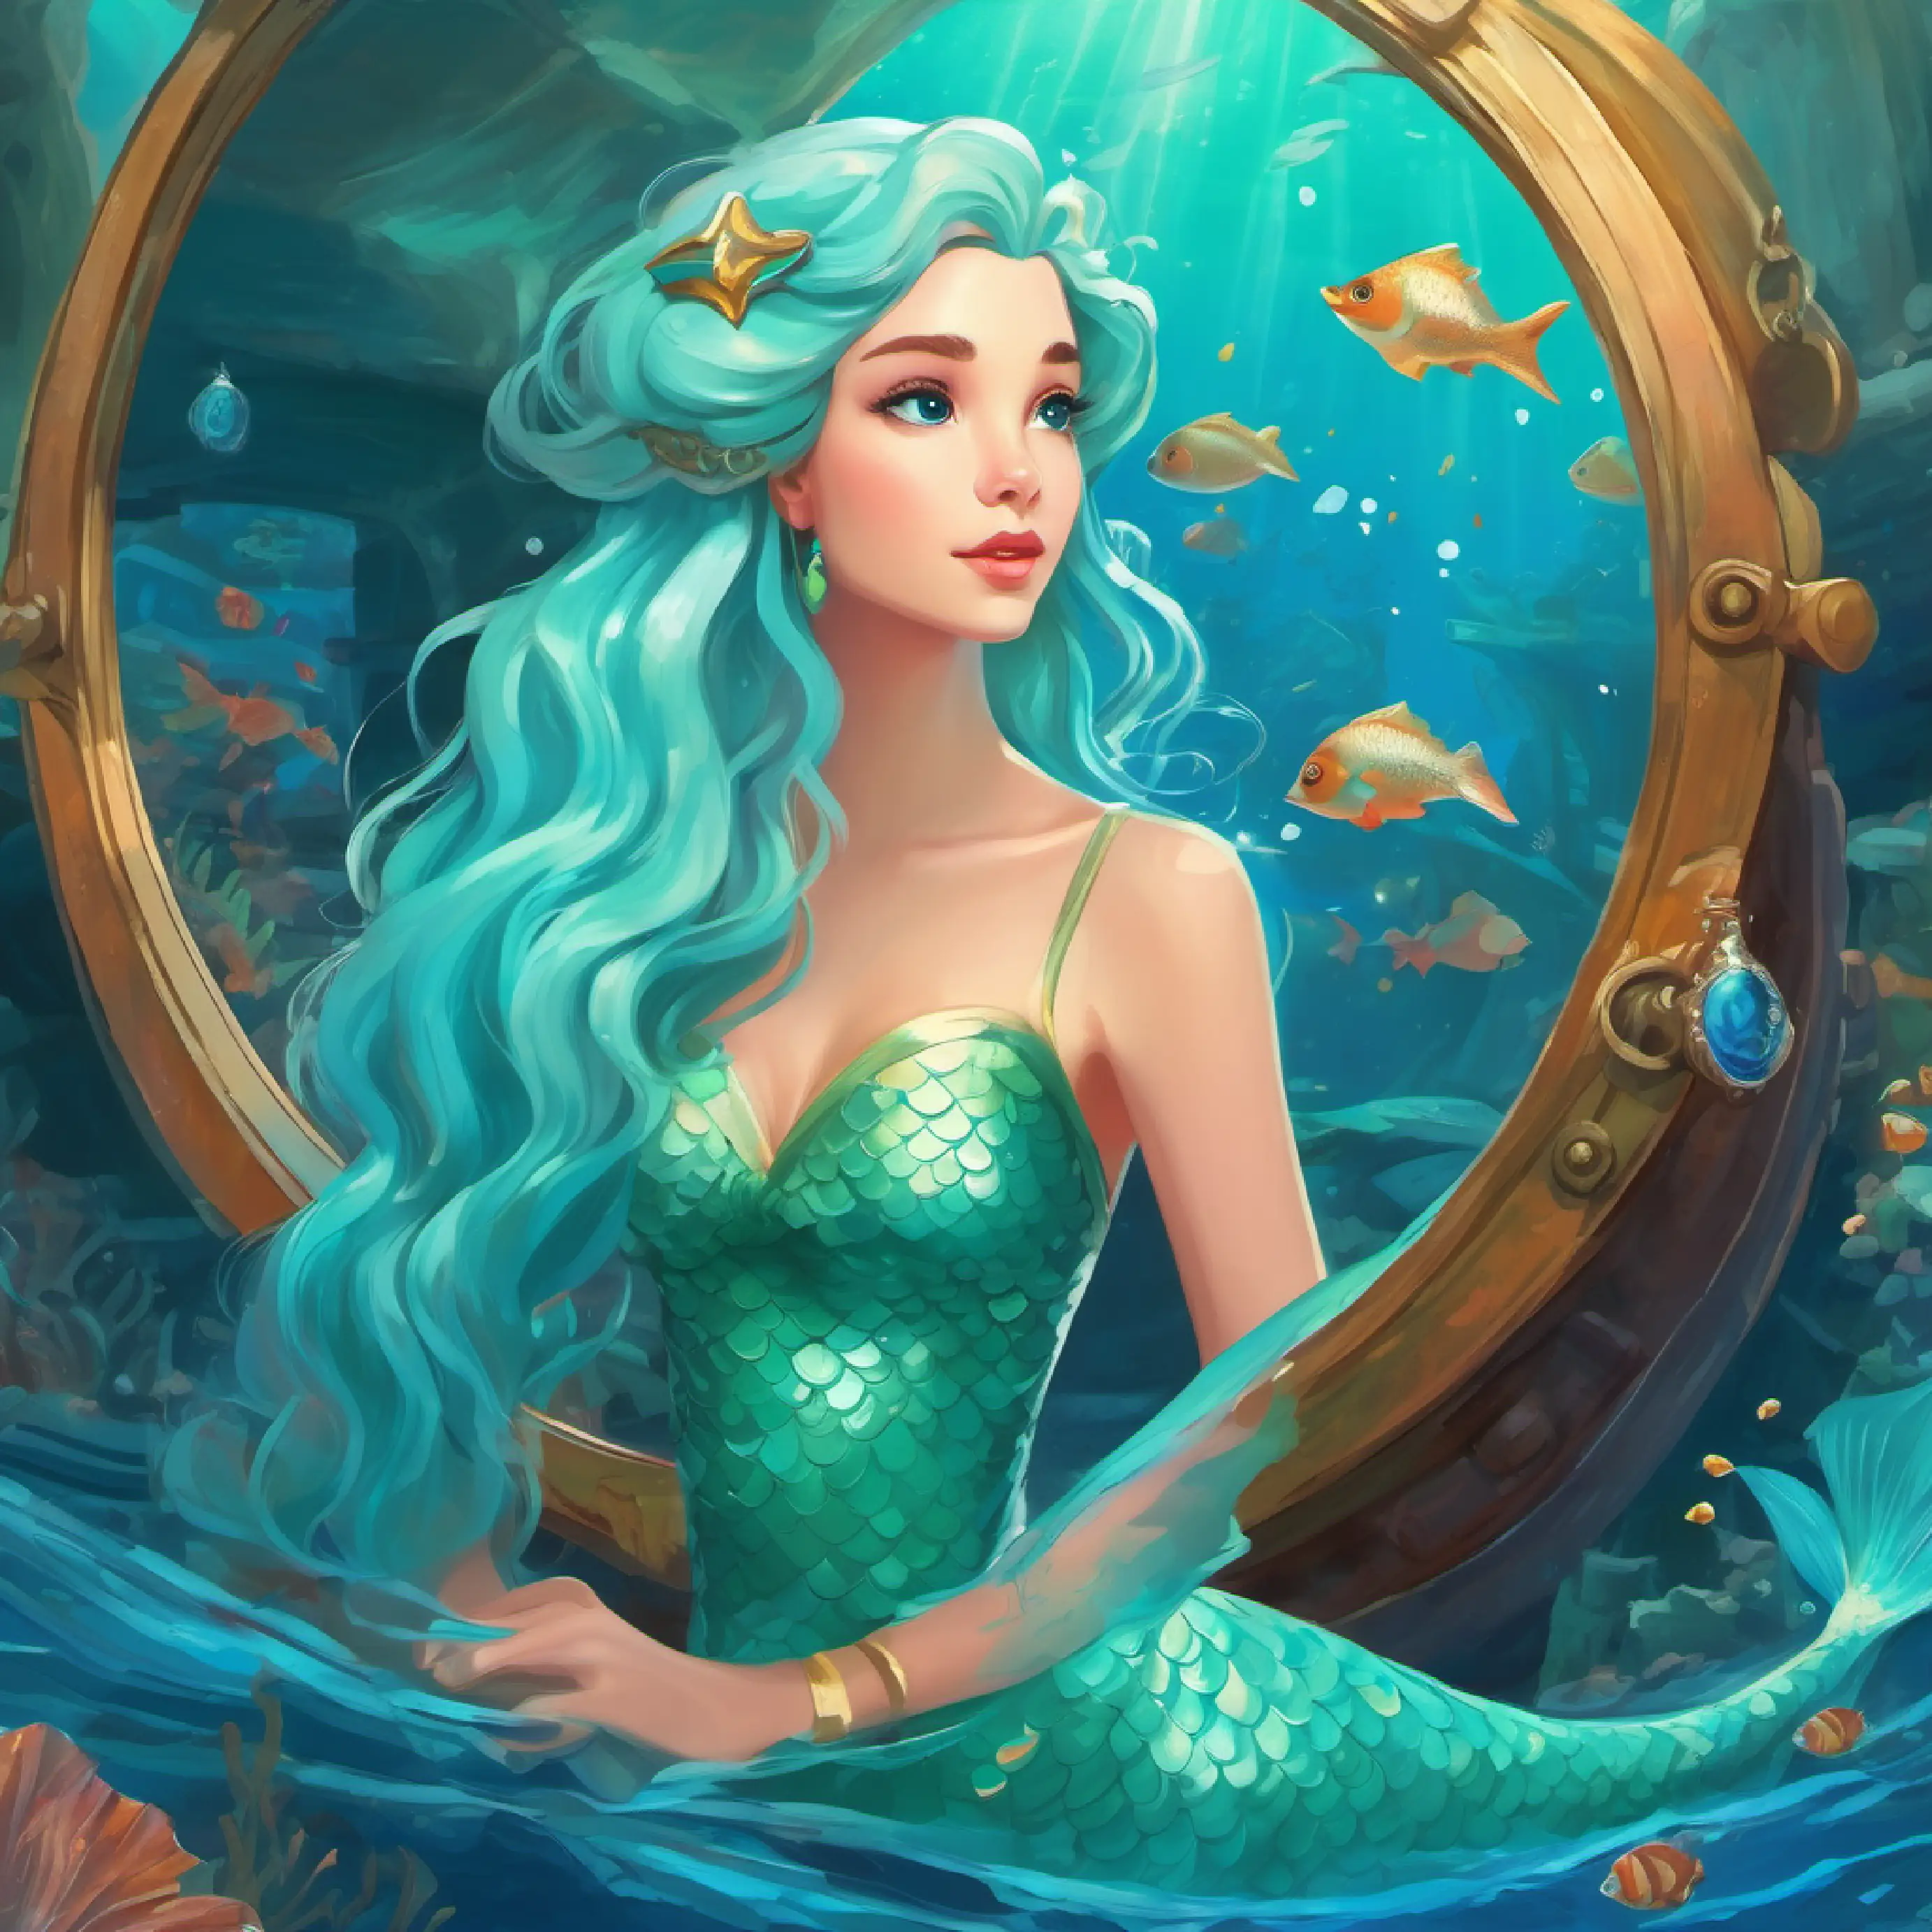 Mermaid princess with sky-blue tail and long aqua hair discovers a mirror in an underwater shipwreck.